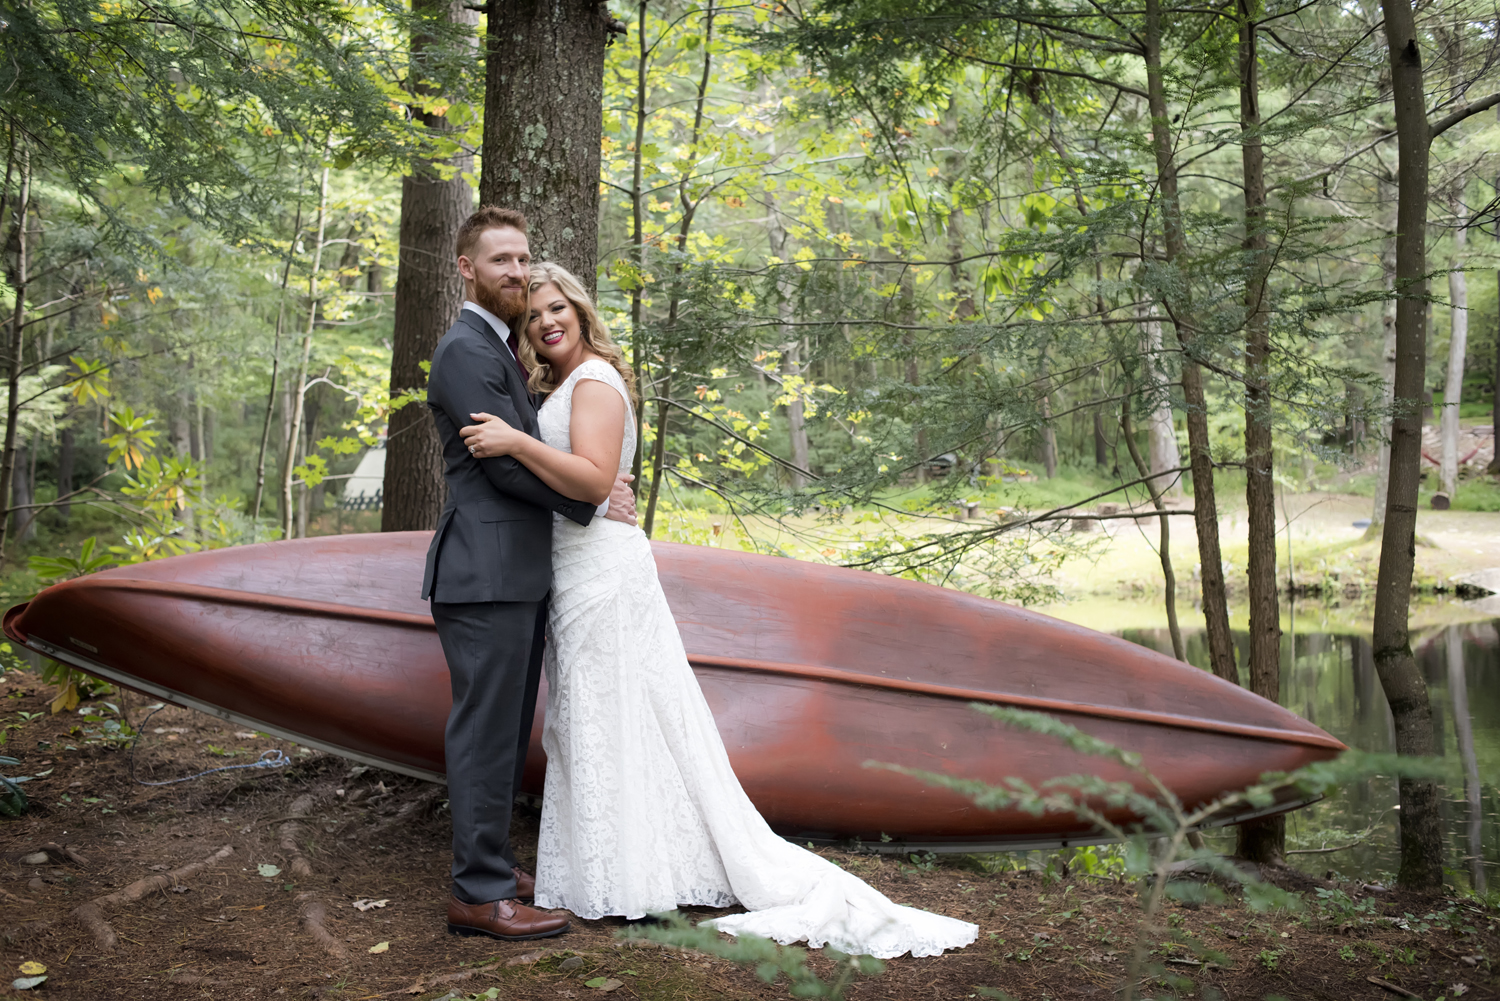 Bride and groom in front of canoe at Magnolia Streamside Resort